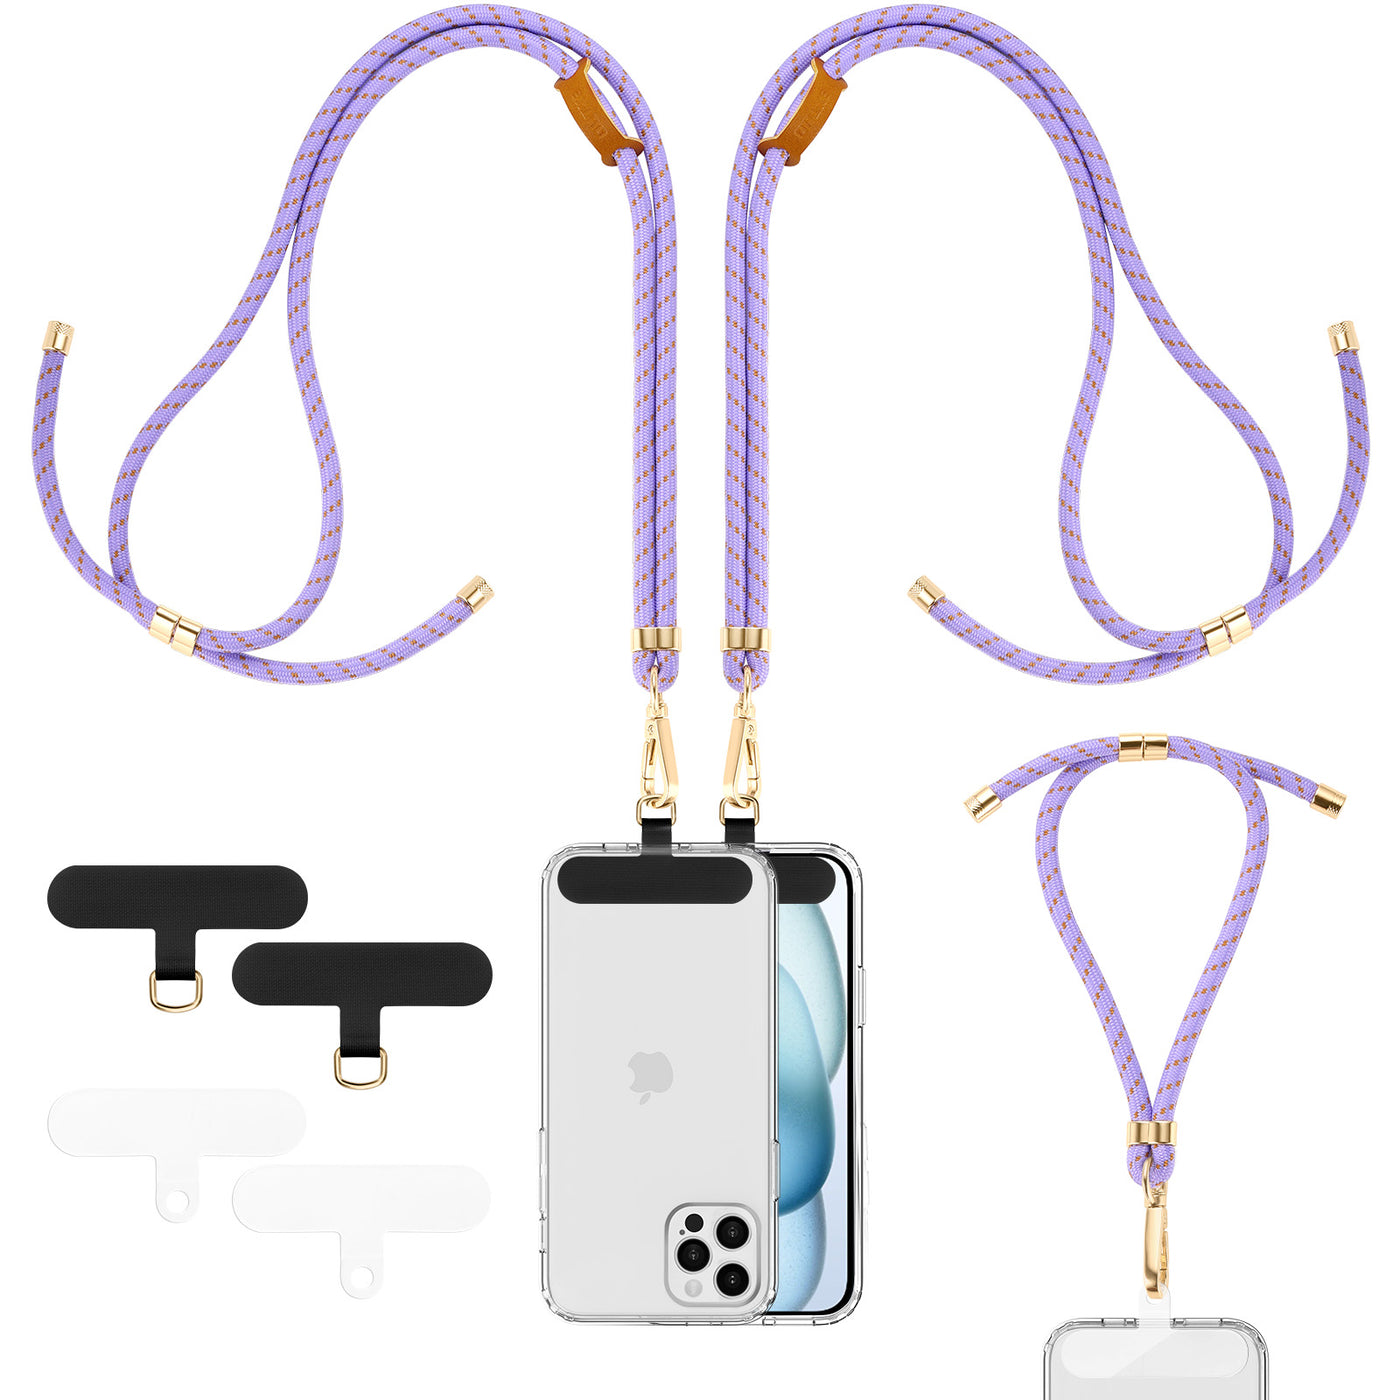 OUTXE Phone Lanyard- 2× Adjustable Crossbody Phone Strap, 1× Wrist Strap, 4× Tab- Anti-Theft Phone Lanyard, Universally Compatible with Most Phones, Ultimate Companion for Travel, Shopping, Concerts